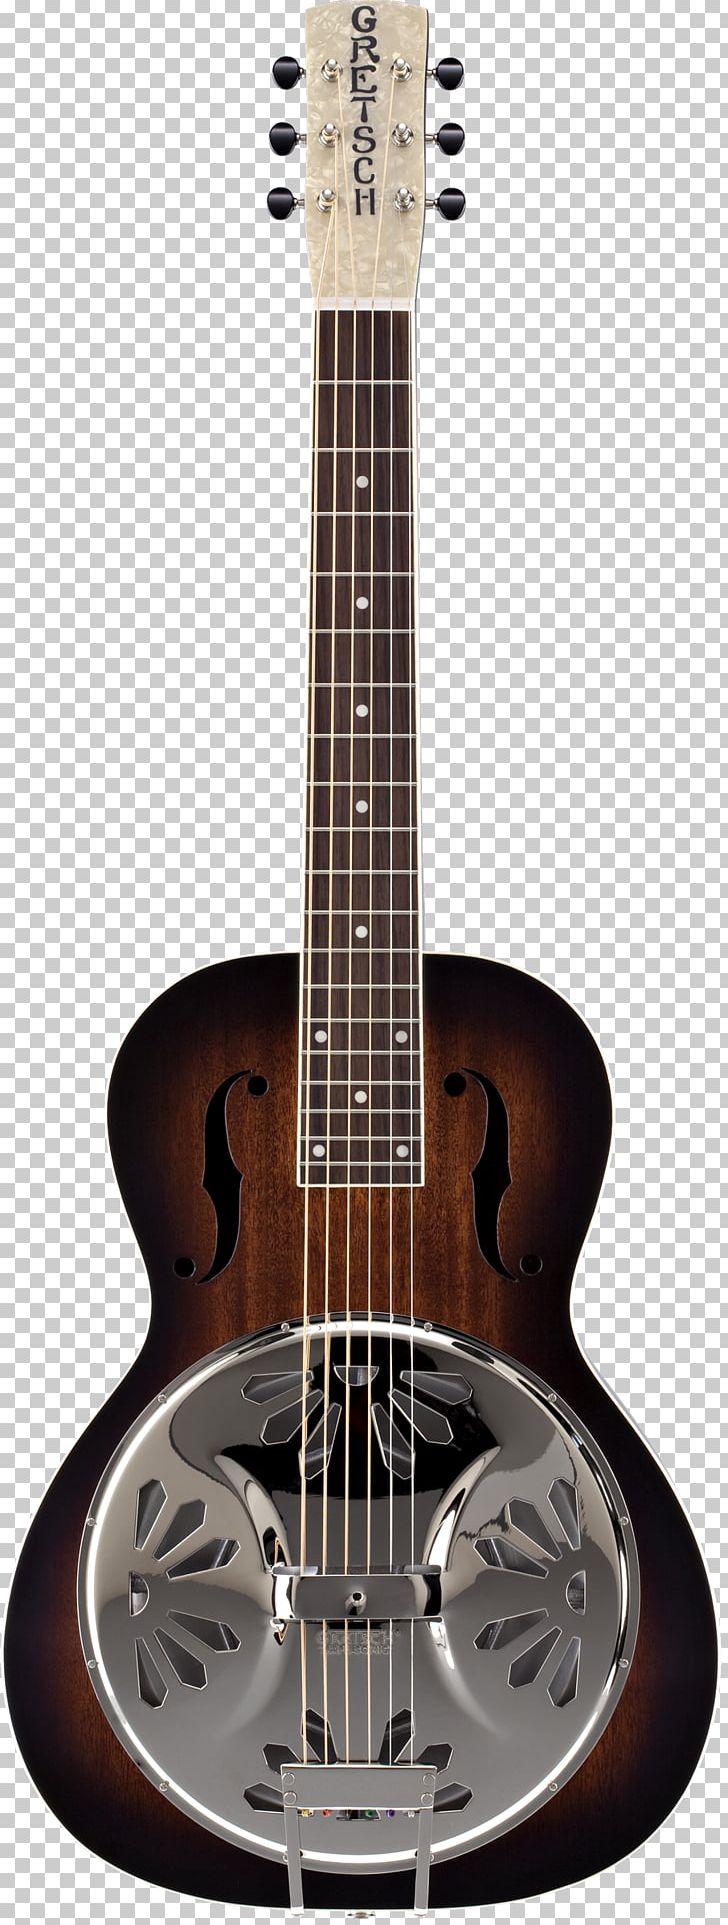 Resonator Guitar Acoustic-electric Guitar Gretsch Acoustic Guitar PNG, Clipart, Acoustic Electric Guitar, Acoustic Guitar, Gretsch, Guitar Accessory, Musical Instruments Free PNG Download